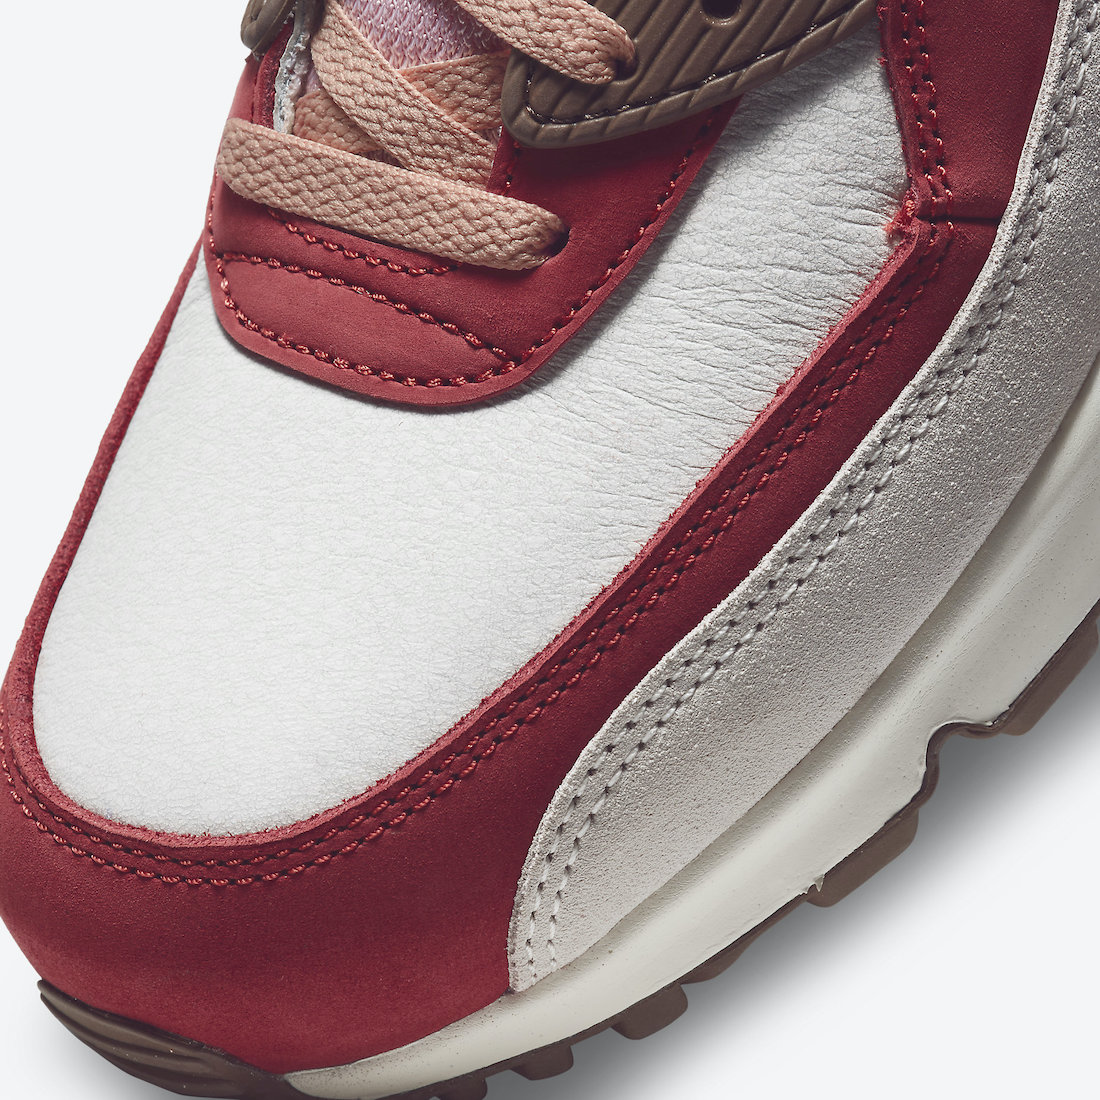 Nike-Air-Max-90-Bacon-CU1816-100-Release-Date-Price-6